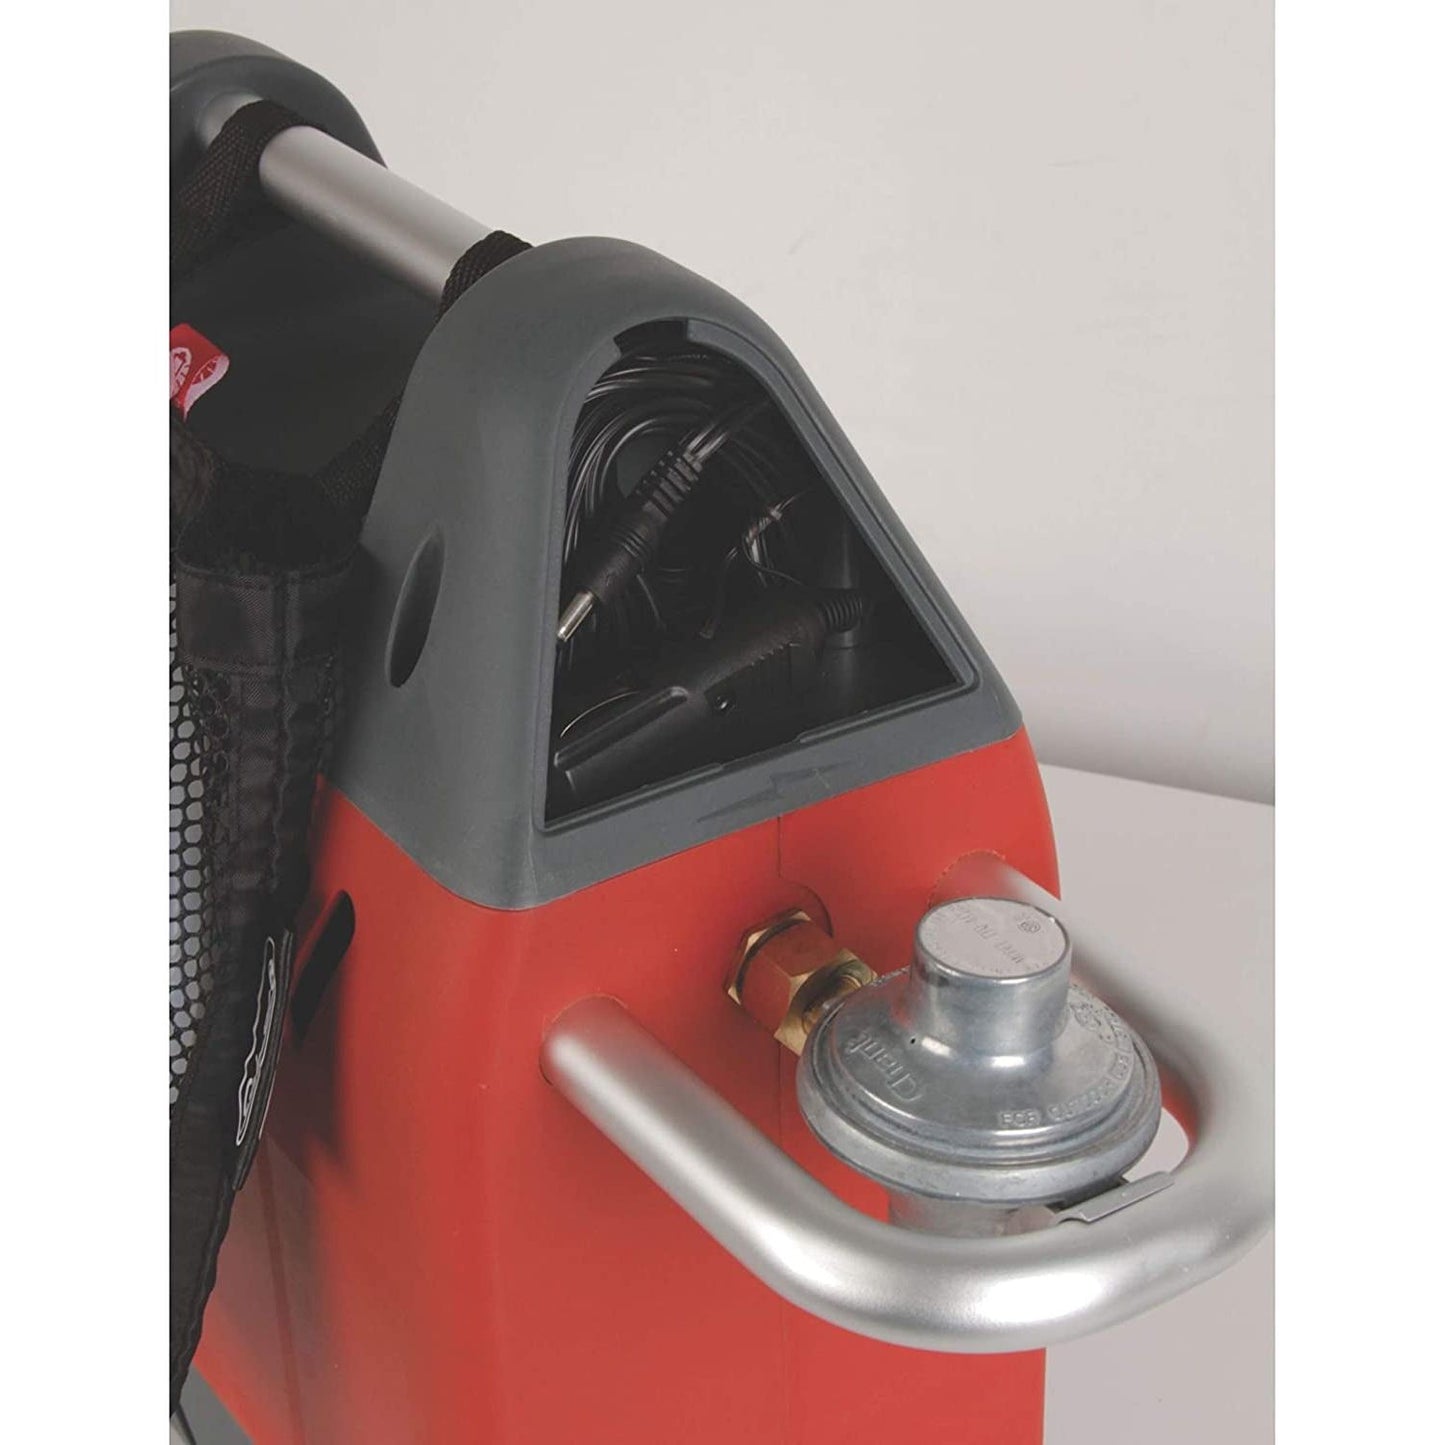 Hot Water on Demand H2Oasis Portable Water Heater